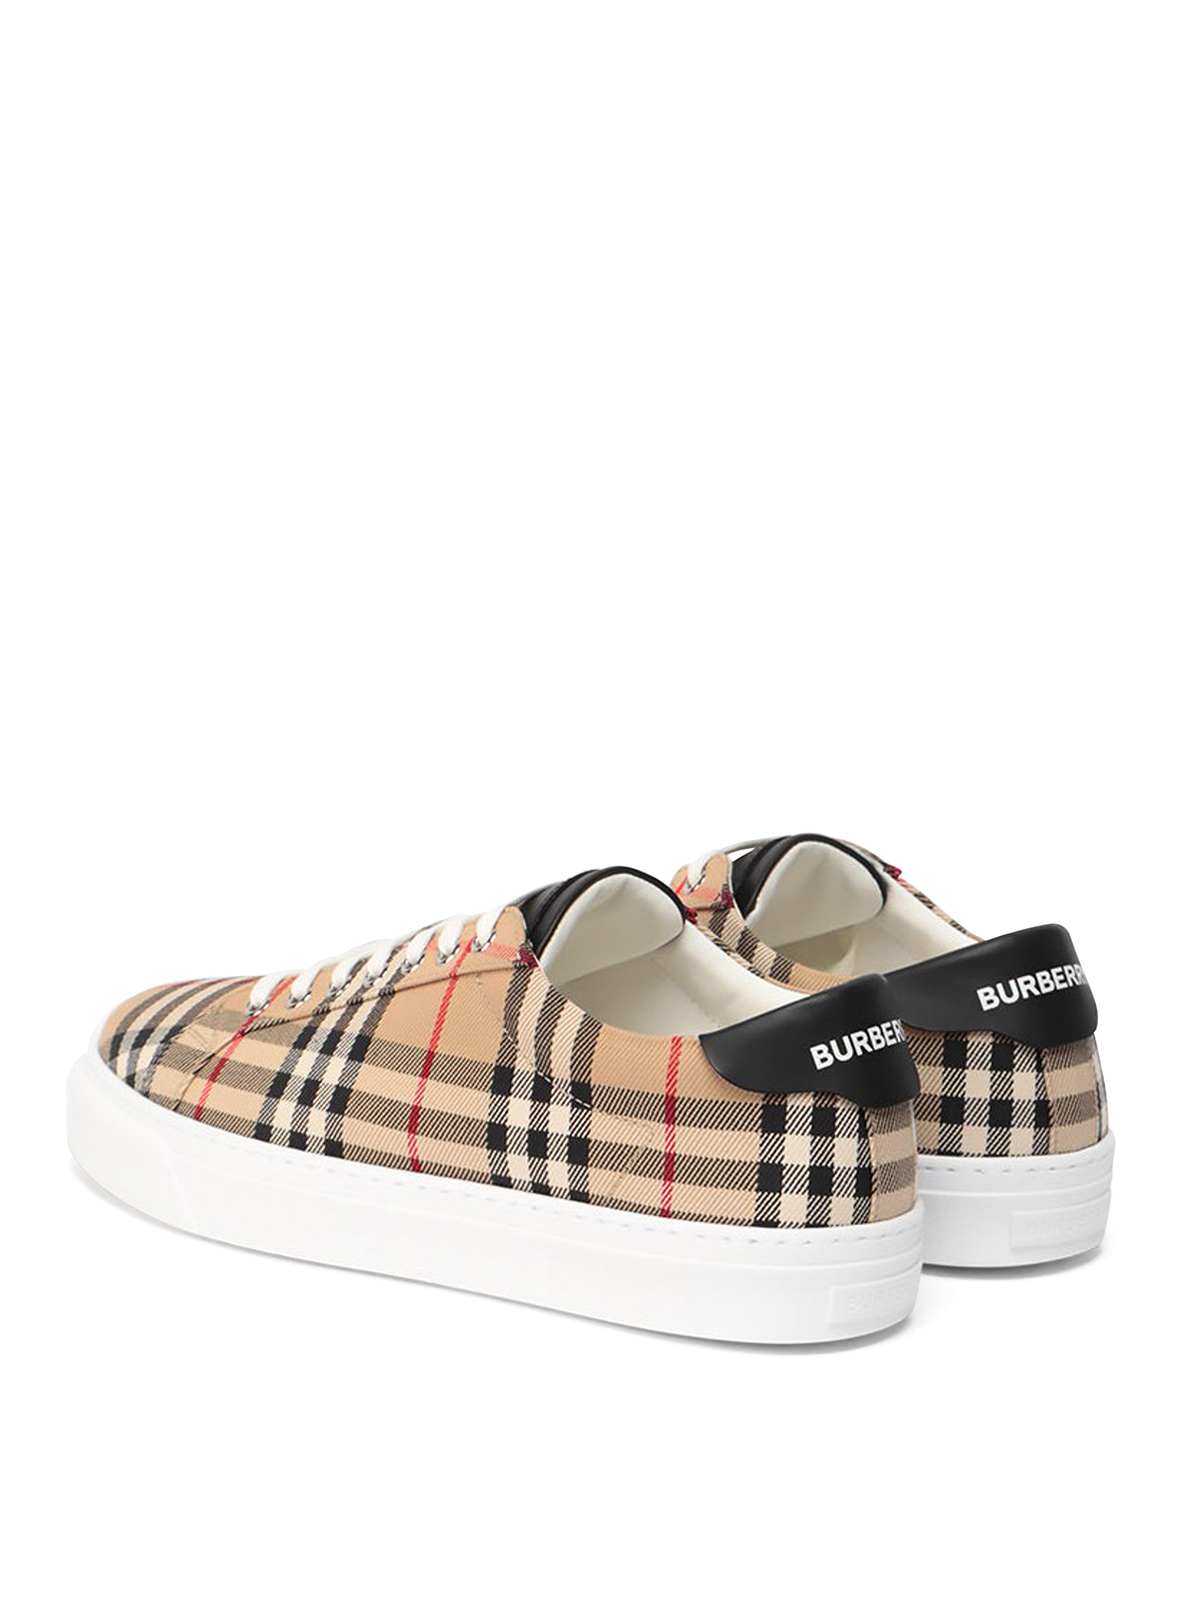 Trainers Burberry - Vintage check patterned sneakers - 8043927 